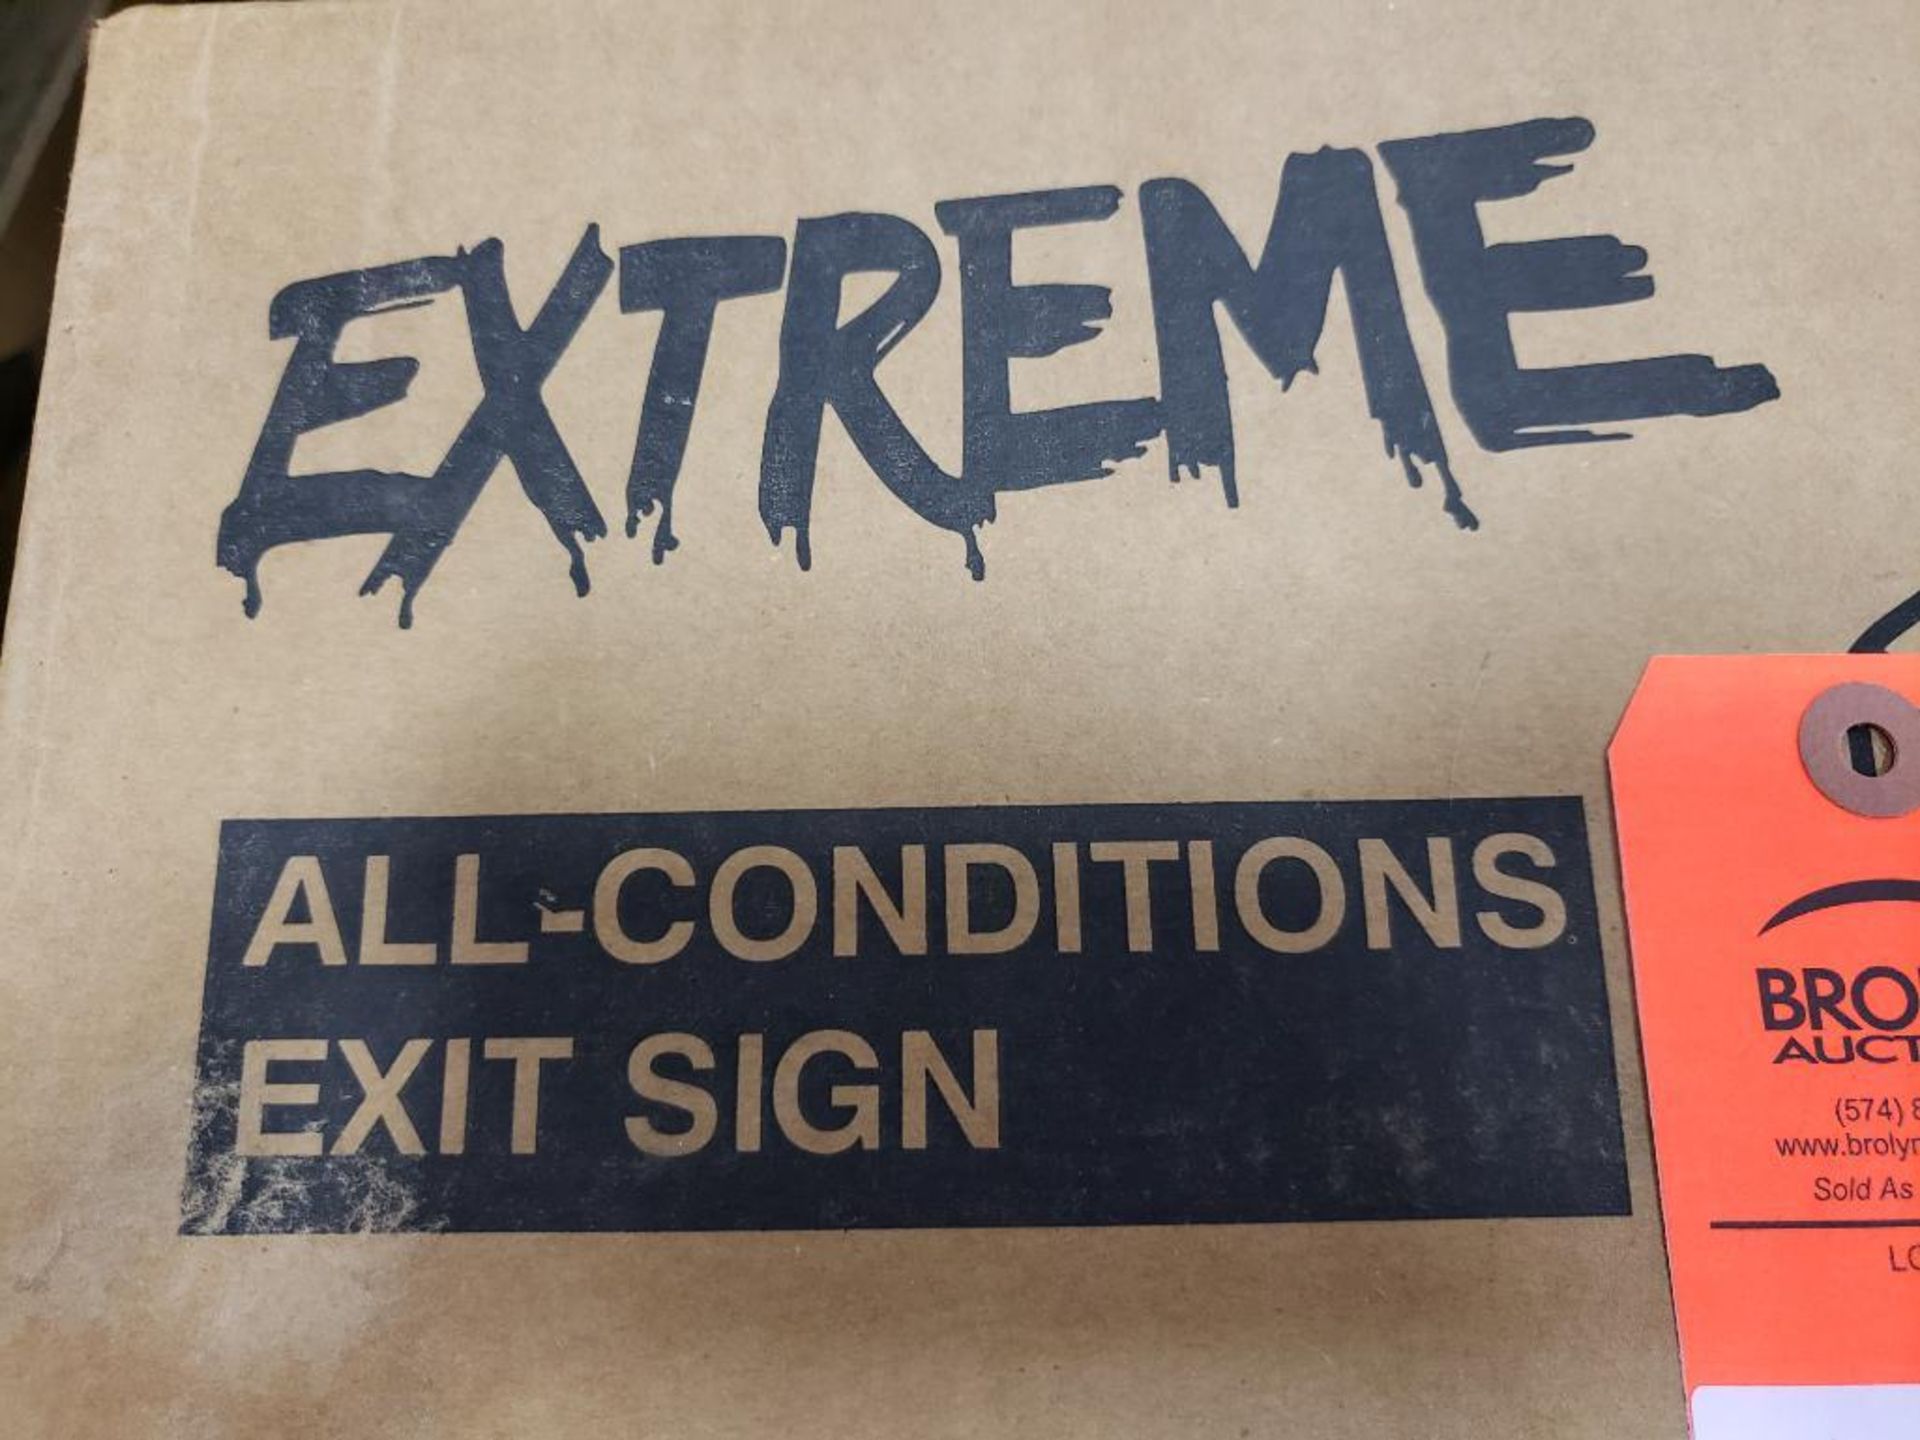 Lithonia Lighting LVSW1R 120/277 Extreme all conditions exit sign. New in box. - Image 2 of 5